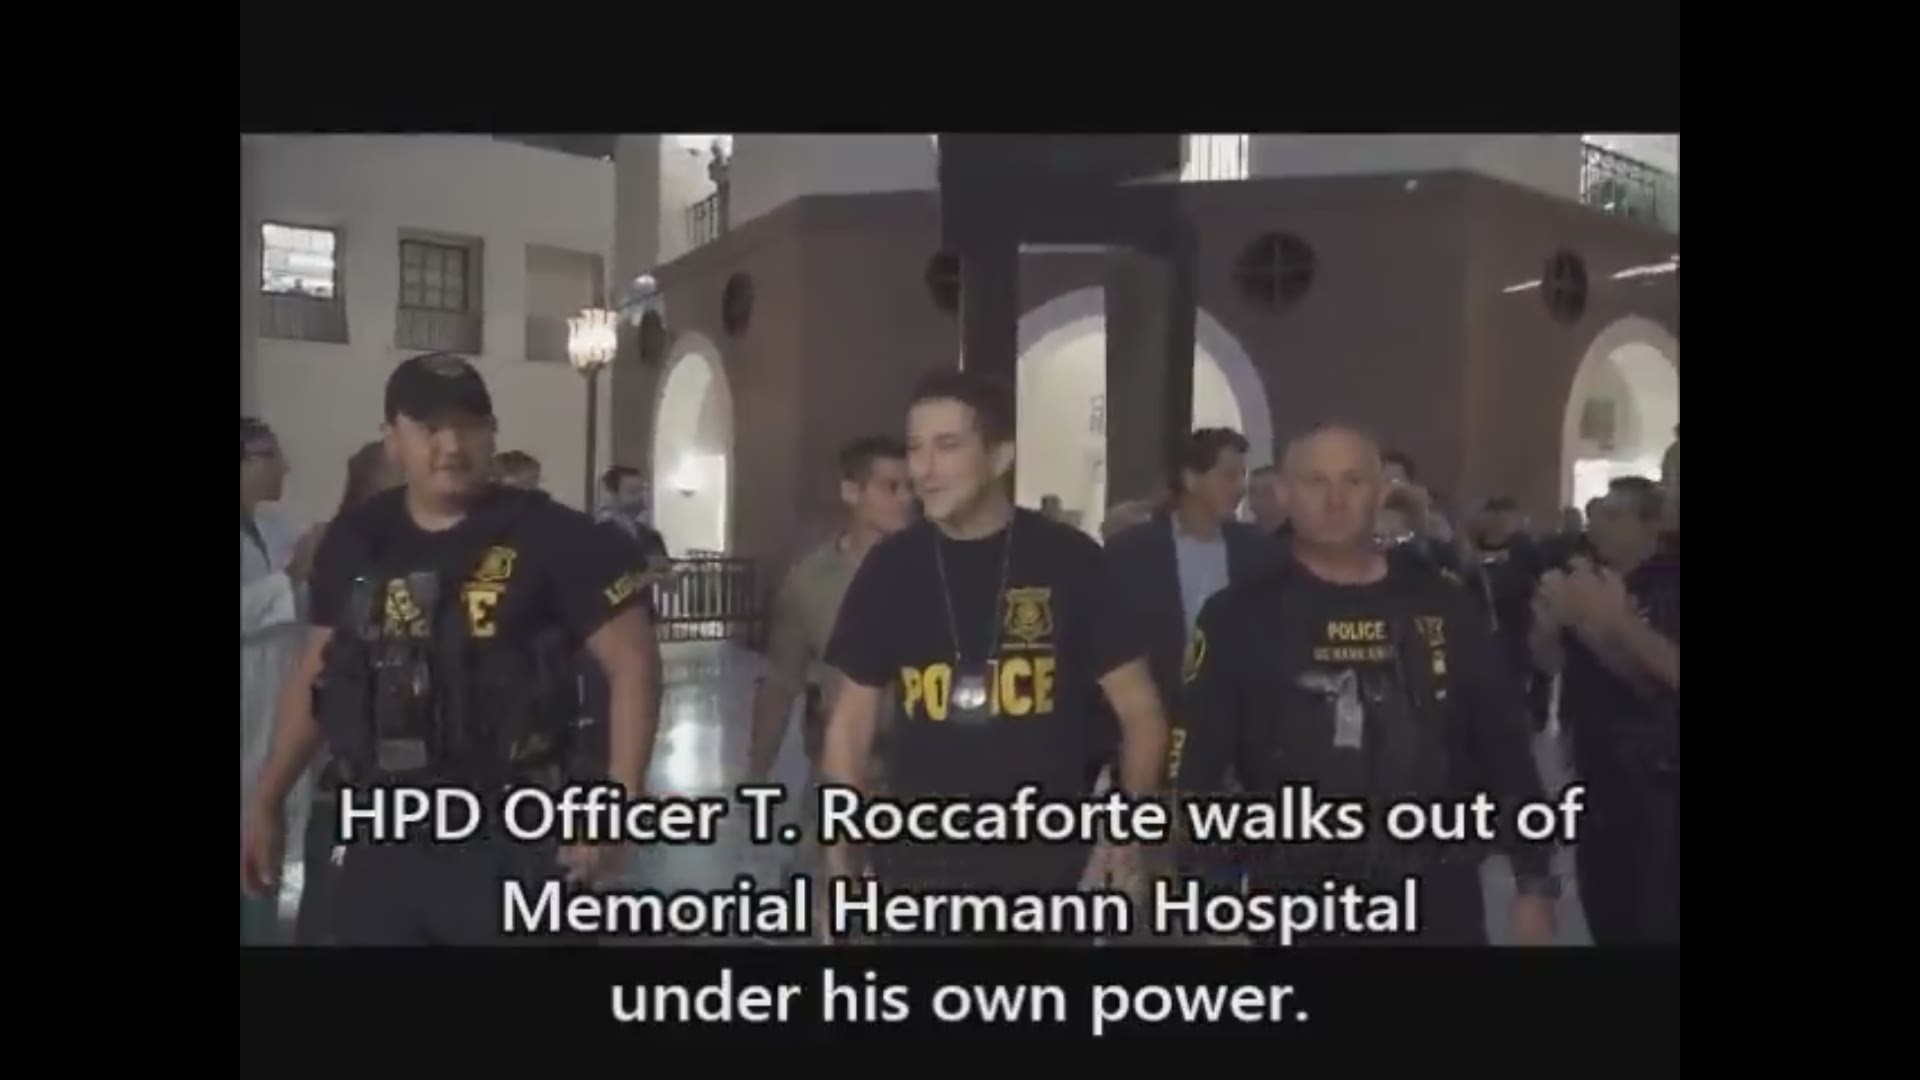 HPD shared video of Officer T. Roccaforte walking out of Memorial Hermann Hospital with fellow officers on hand